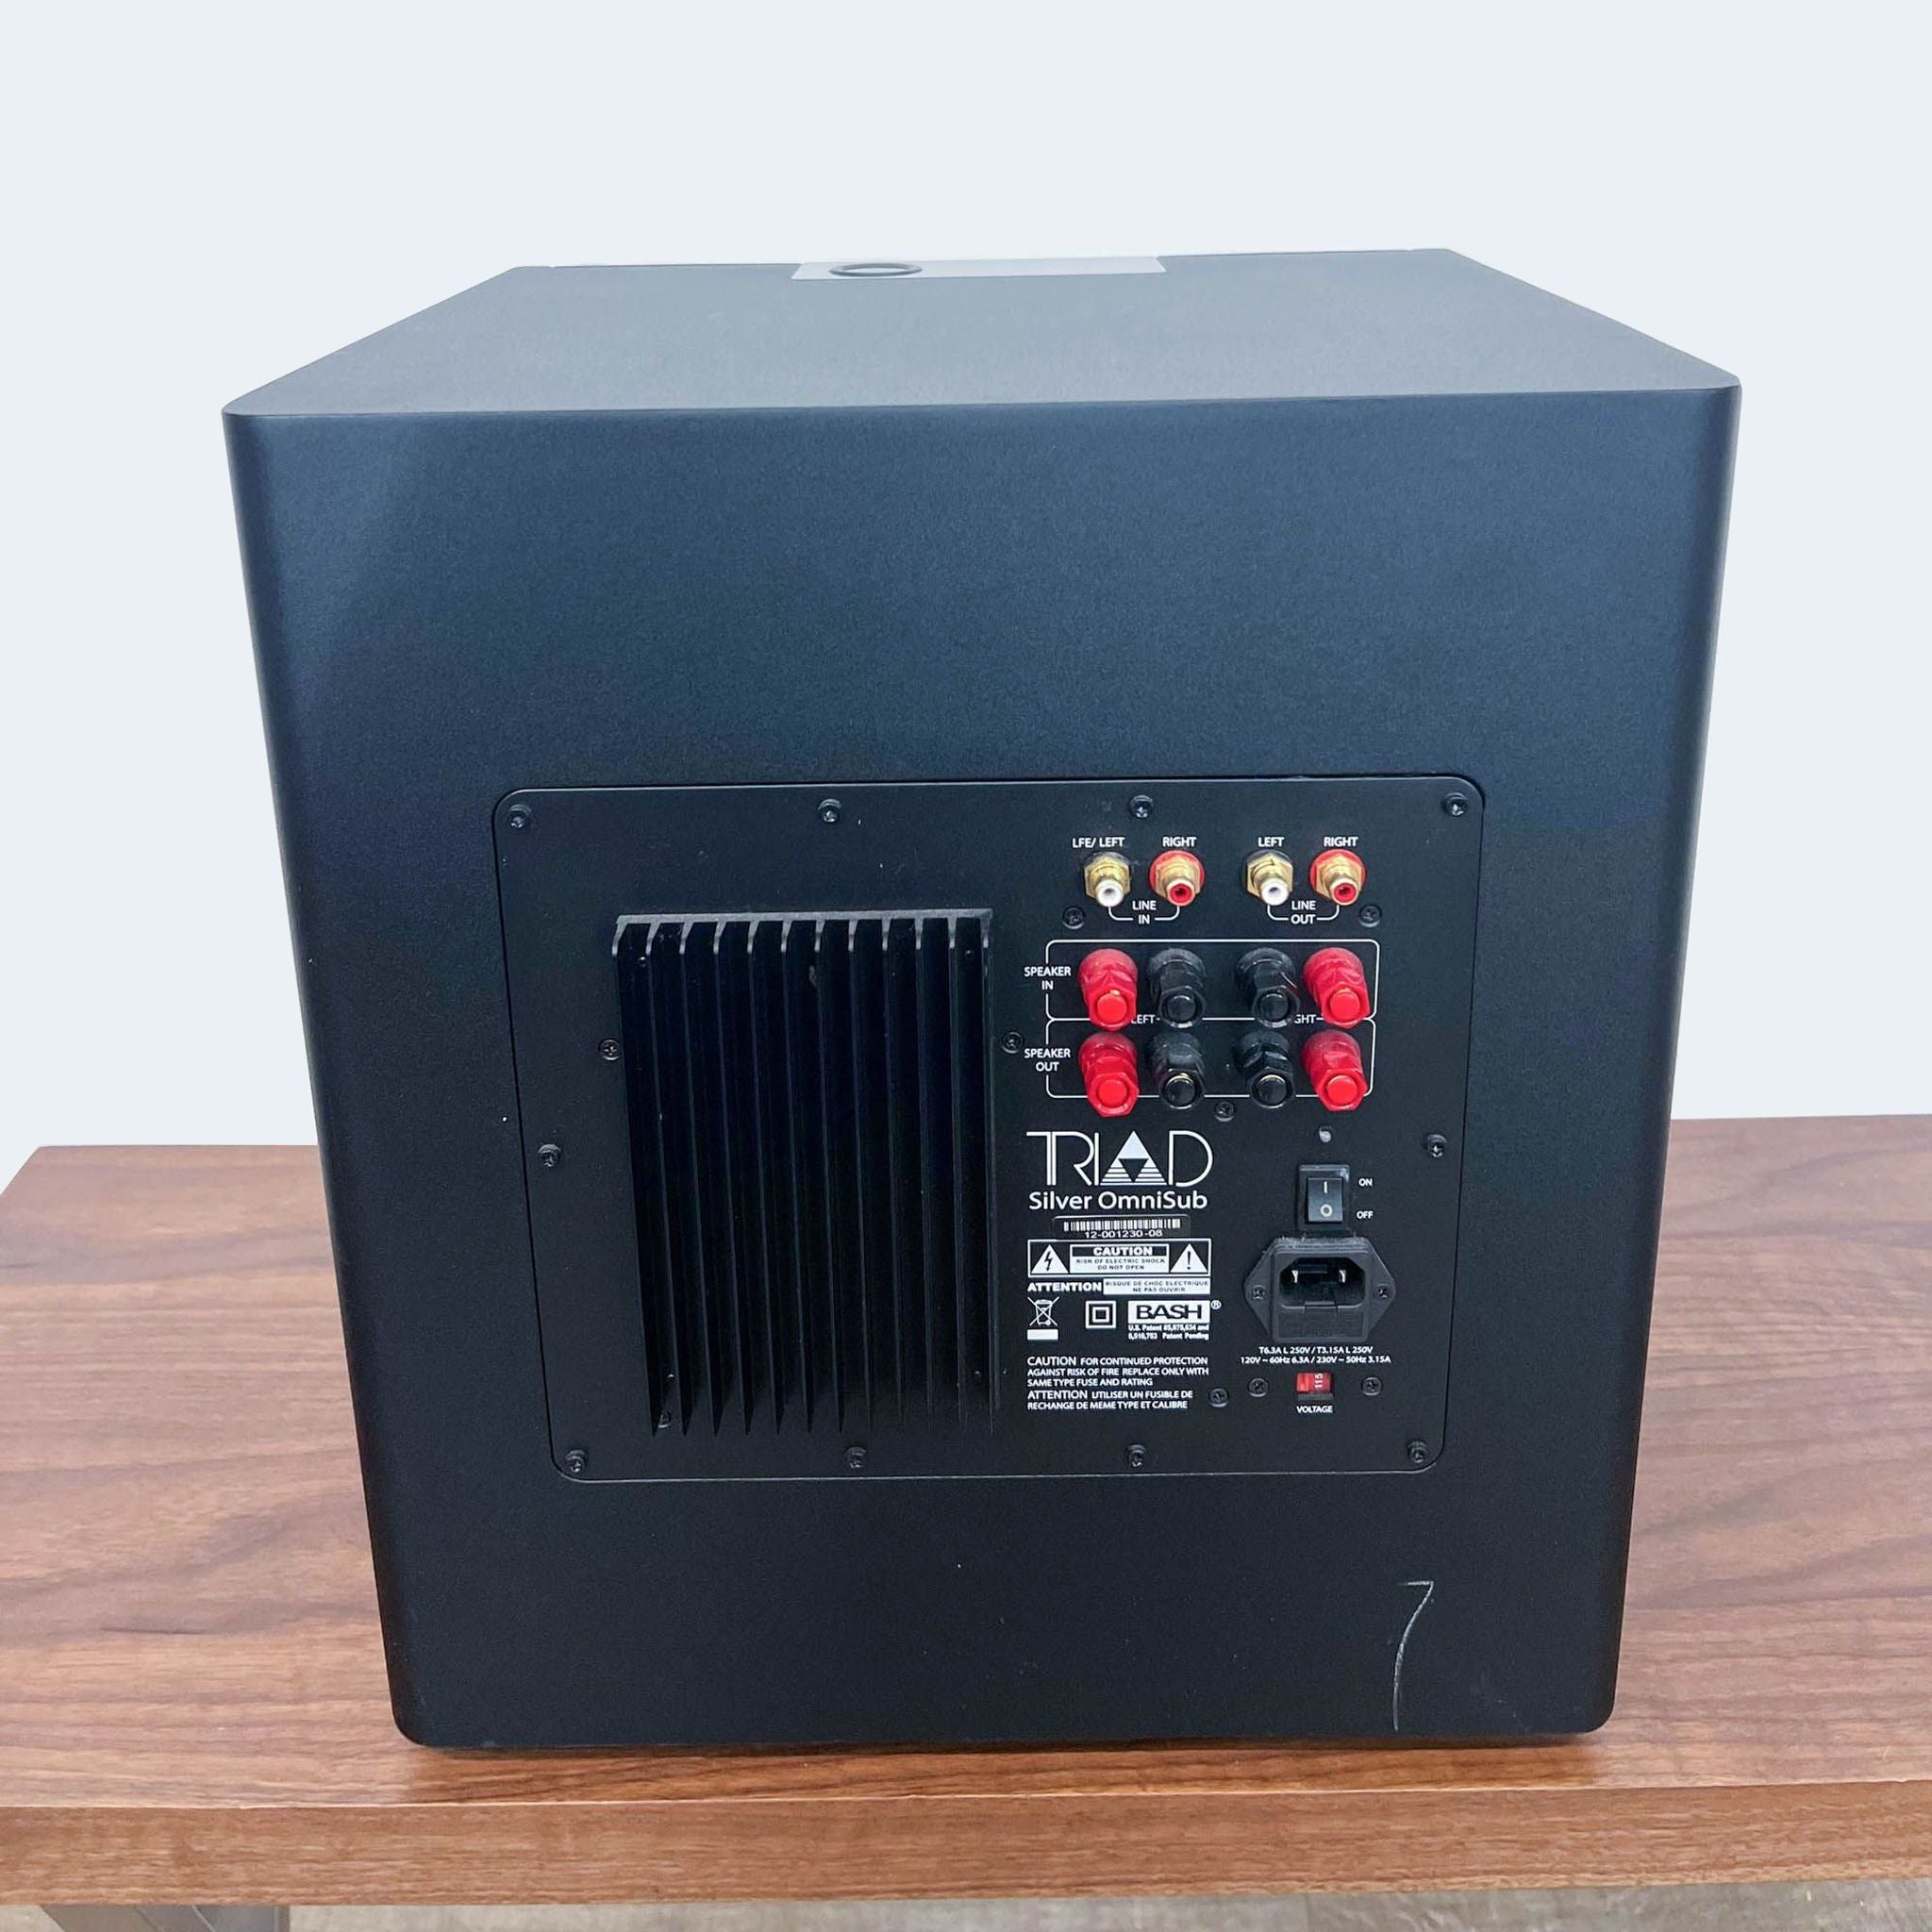 Rear view of a Triad subwoofer showing connections and heat sink.